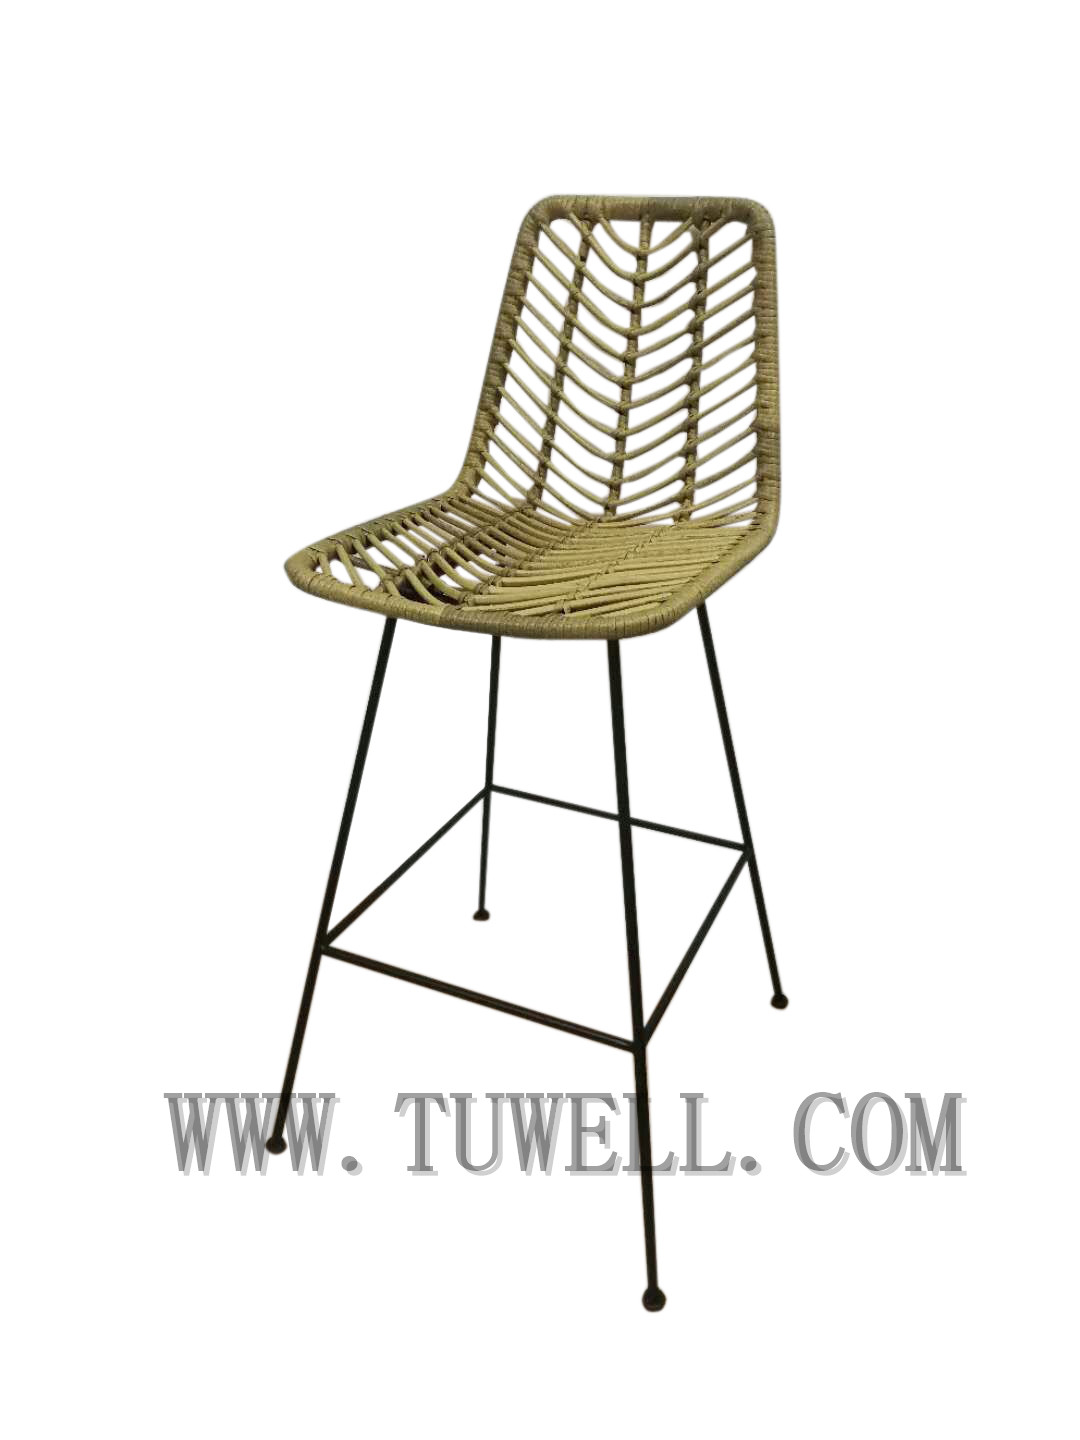 Tuwell-Oem Rattan Chair Manufacturer, Rattan Chair Wholesale | Tuwell-5